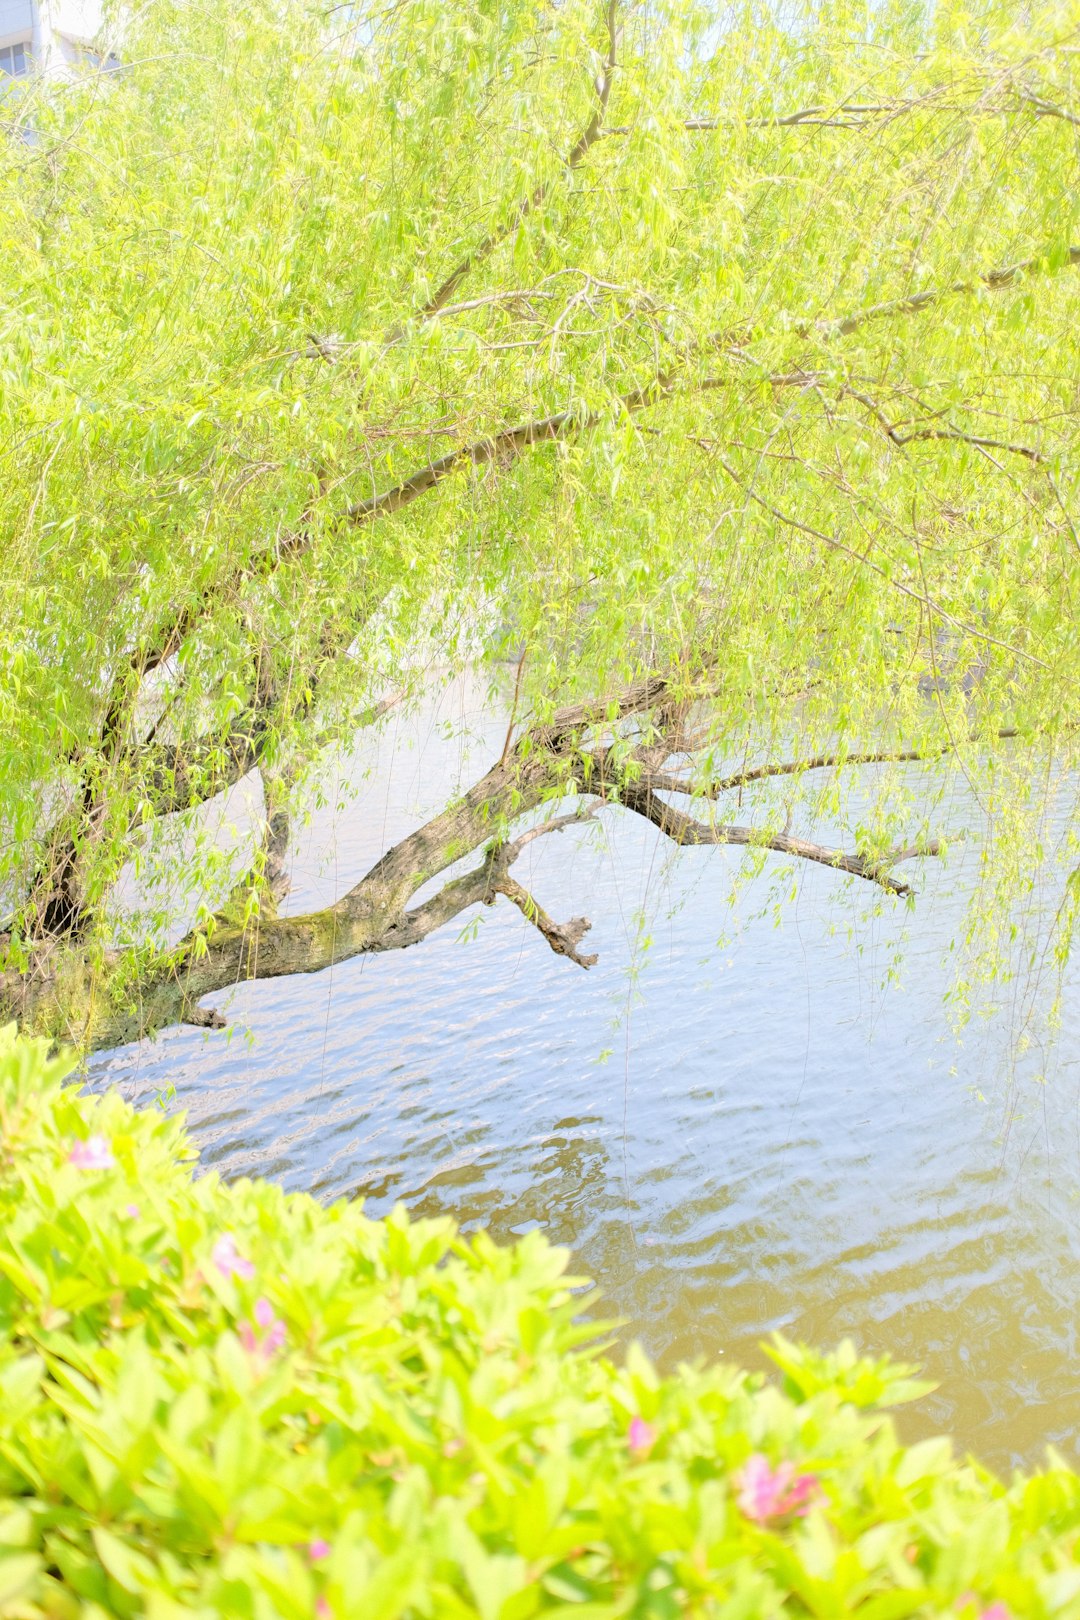 green tree on body of water during daytime